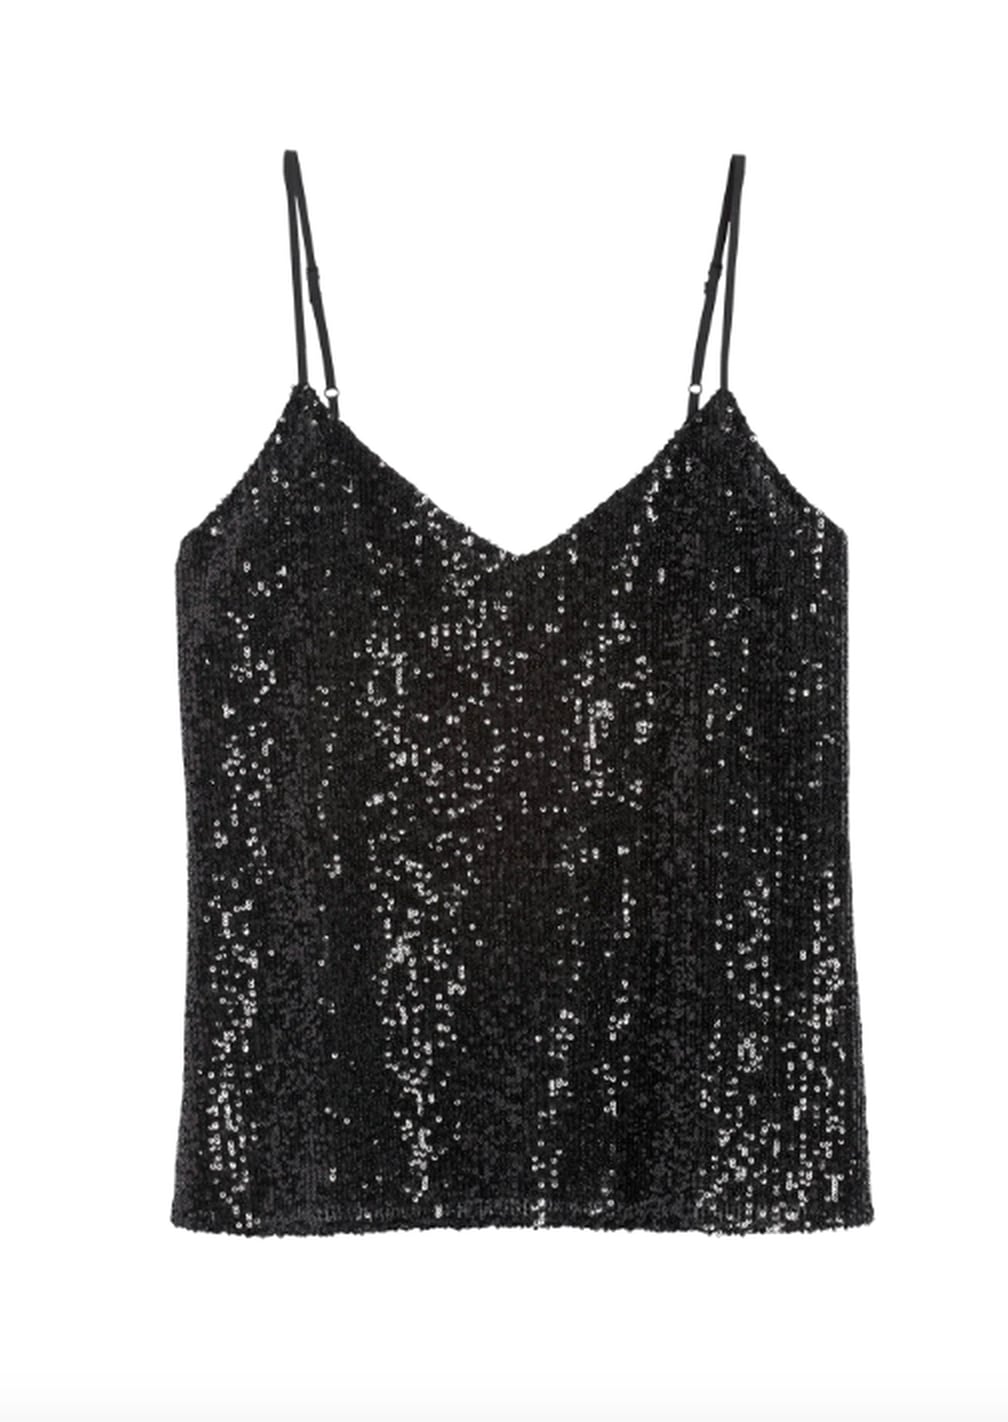 Best Sequined Clothing From Banana Republic For the Holidays | POPSUGAR ...